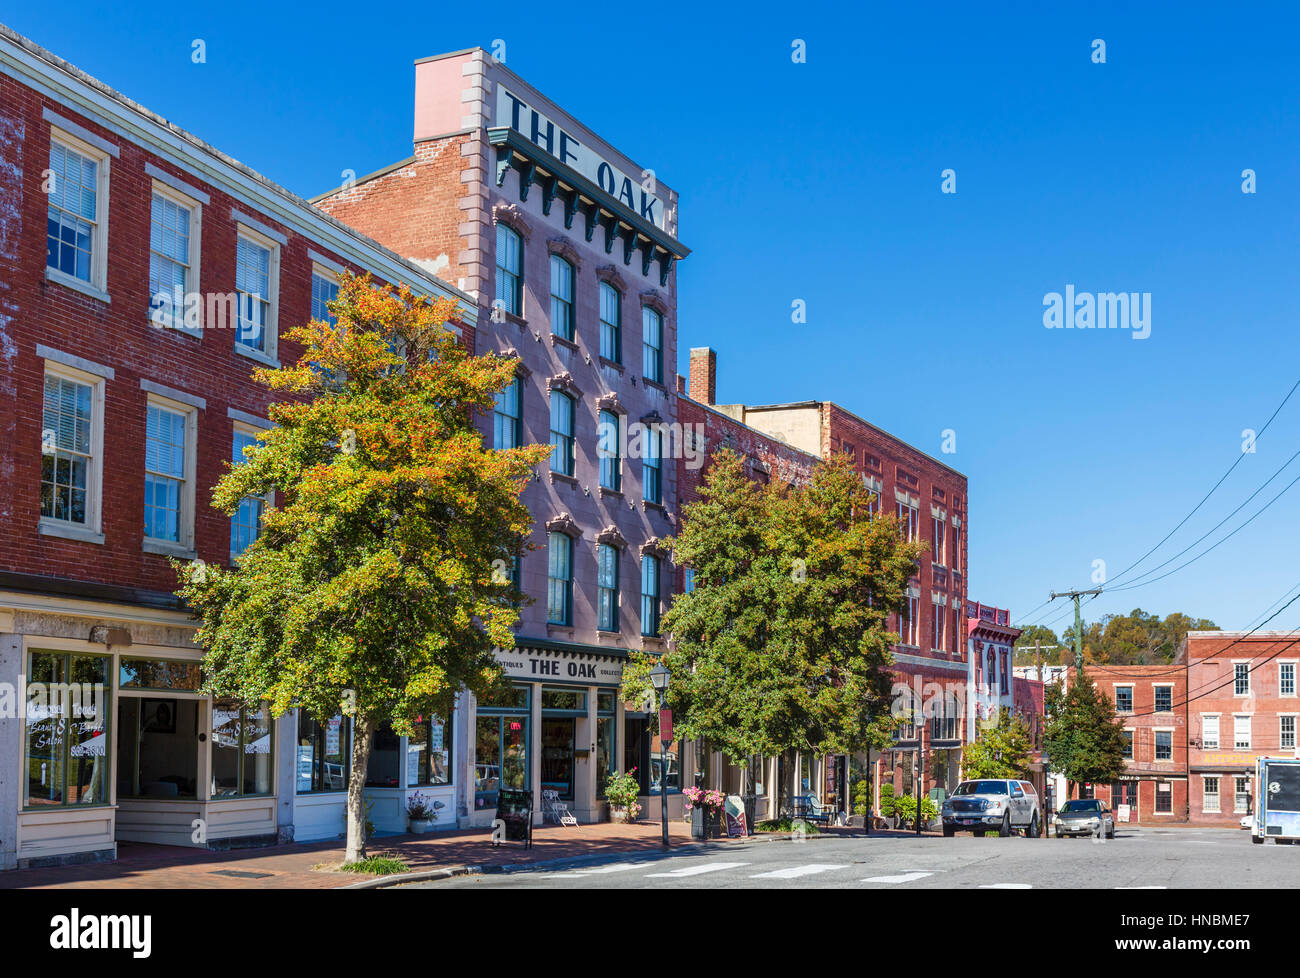 Petersburg, Virginia, USA. Historic buildings in the downtown area of Petersburg, site of the American Civil War siege. Stock Photo